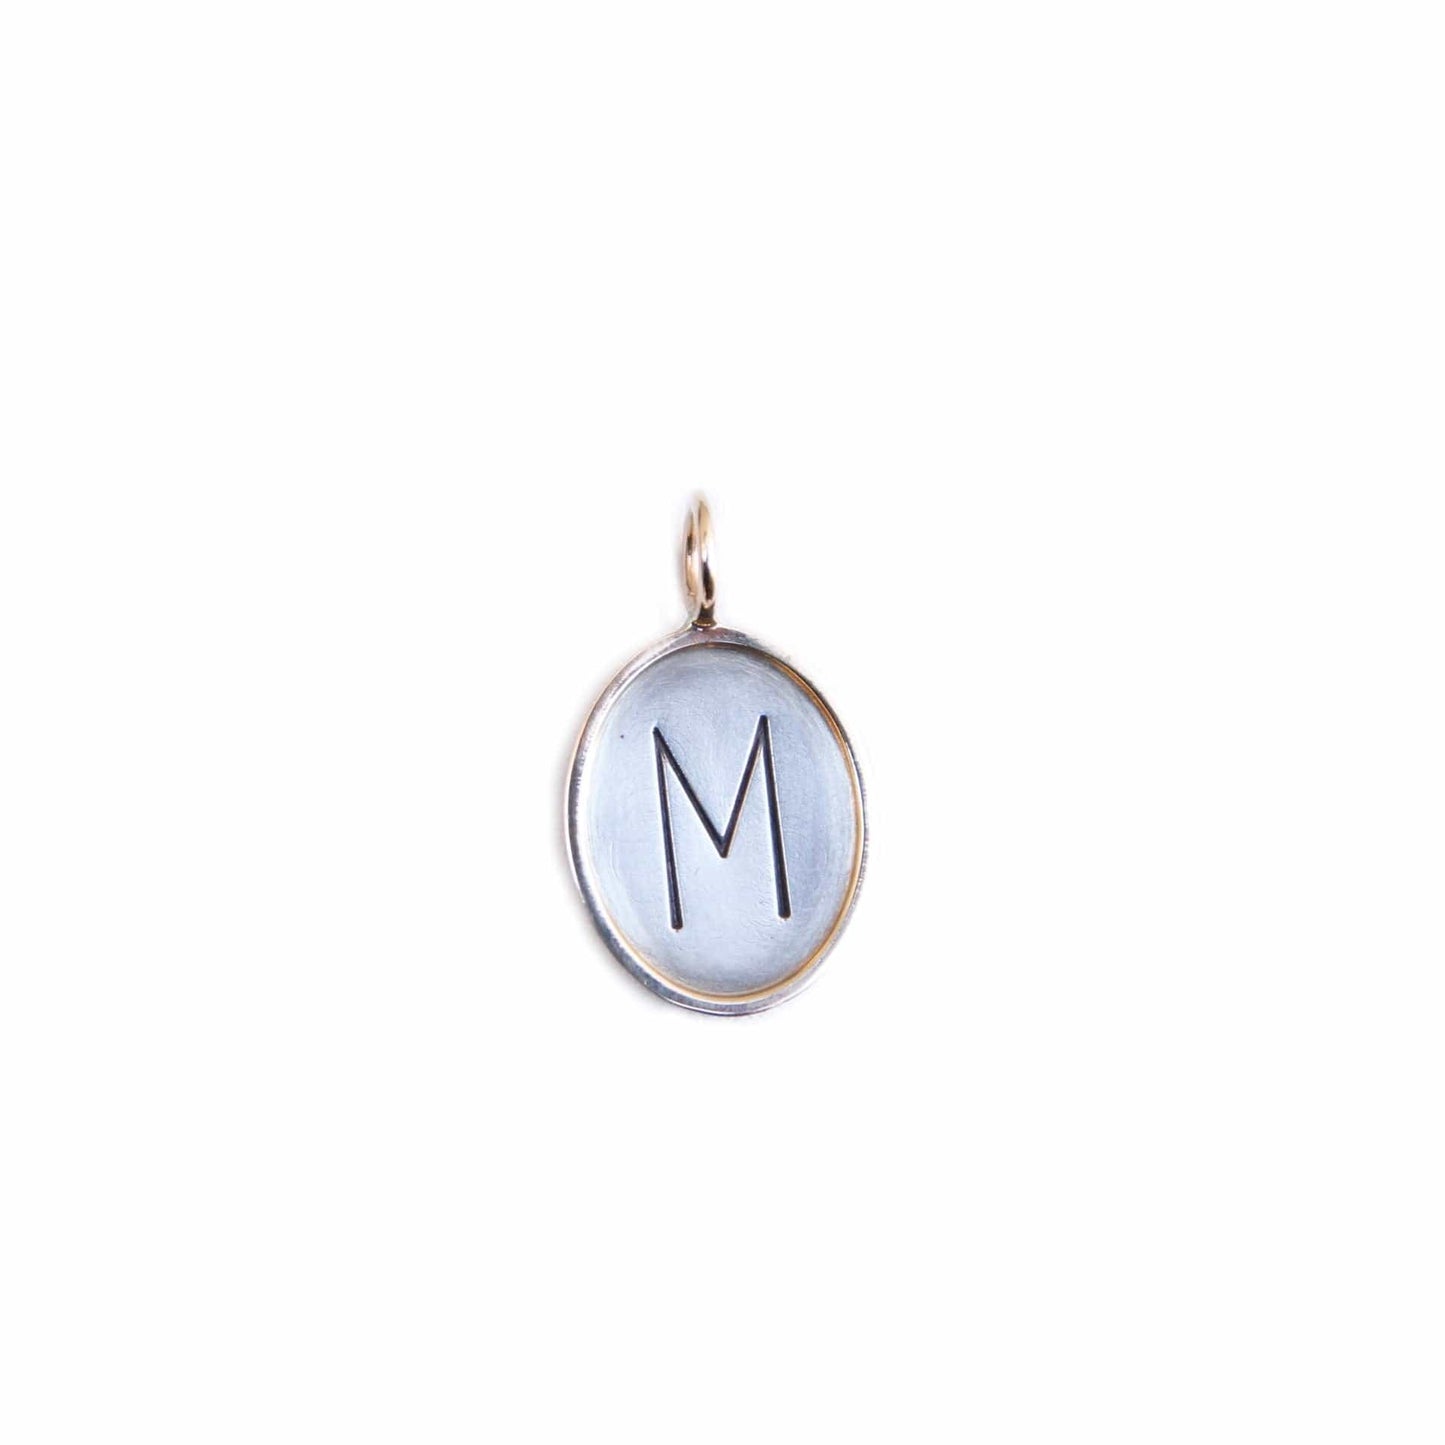 CHM Silver "M" Oval Charm with 14K Gold Frame